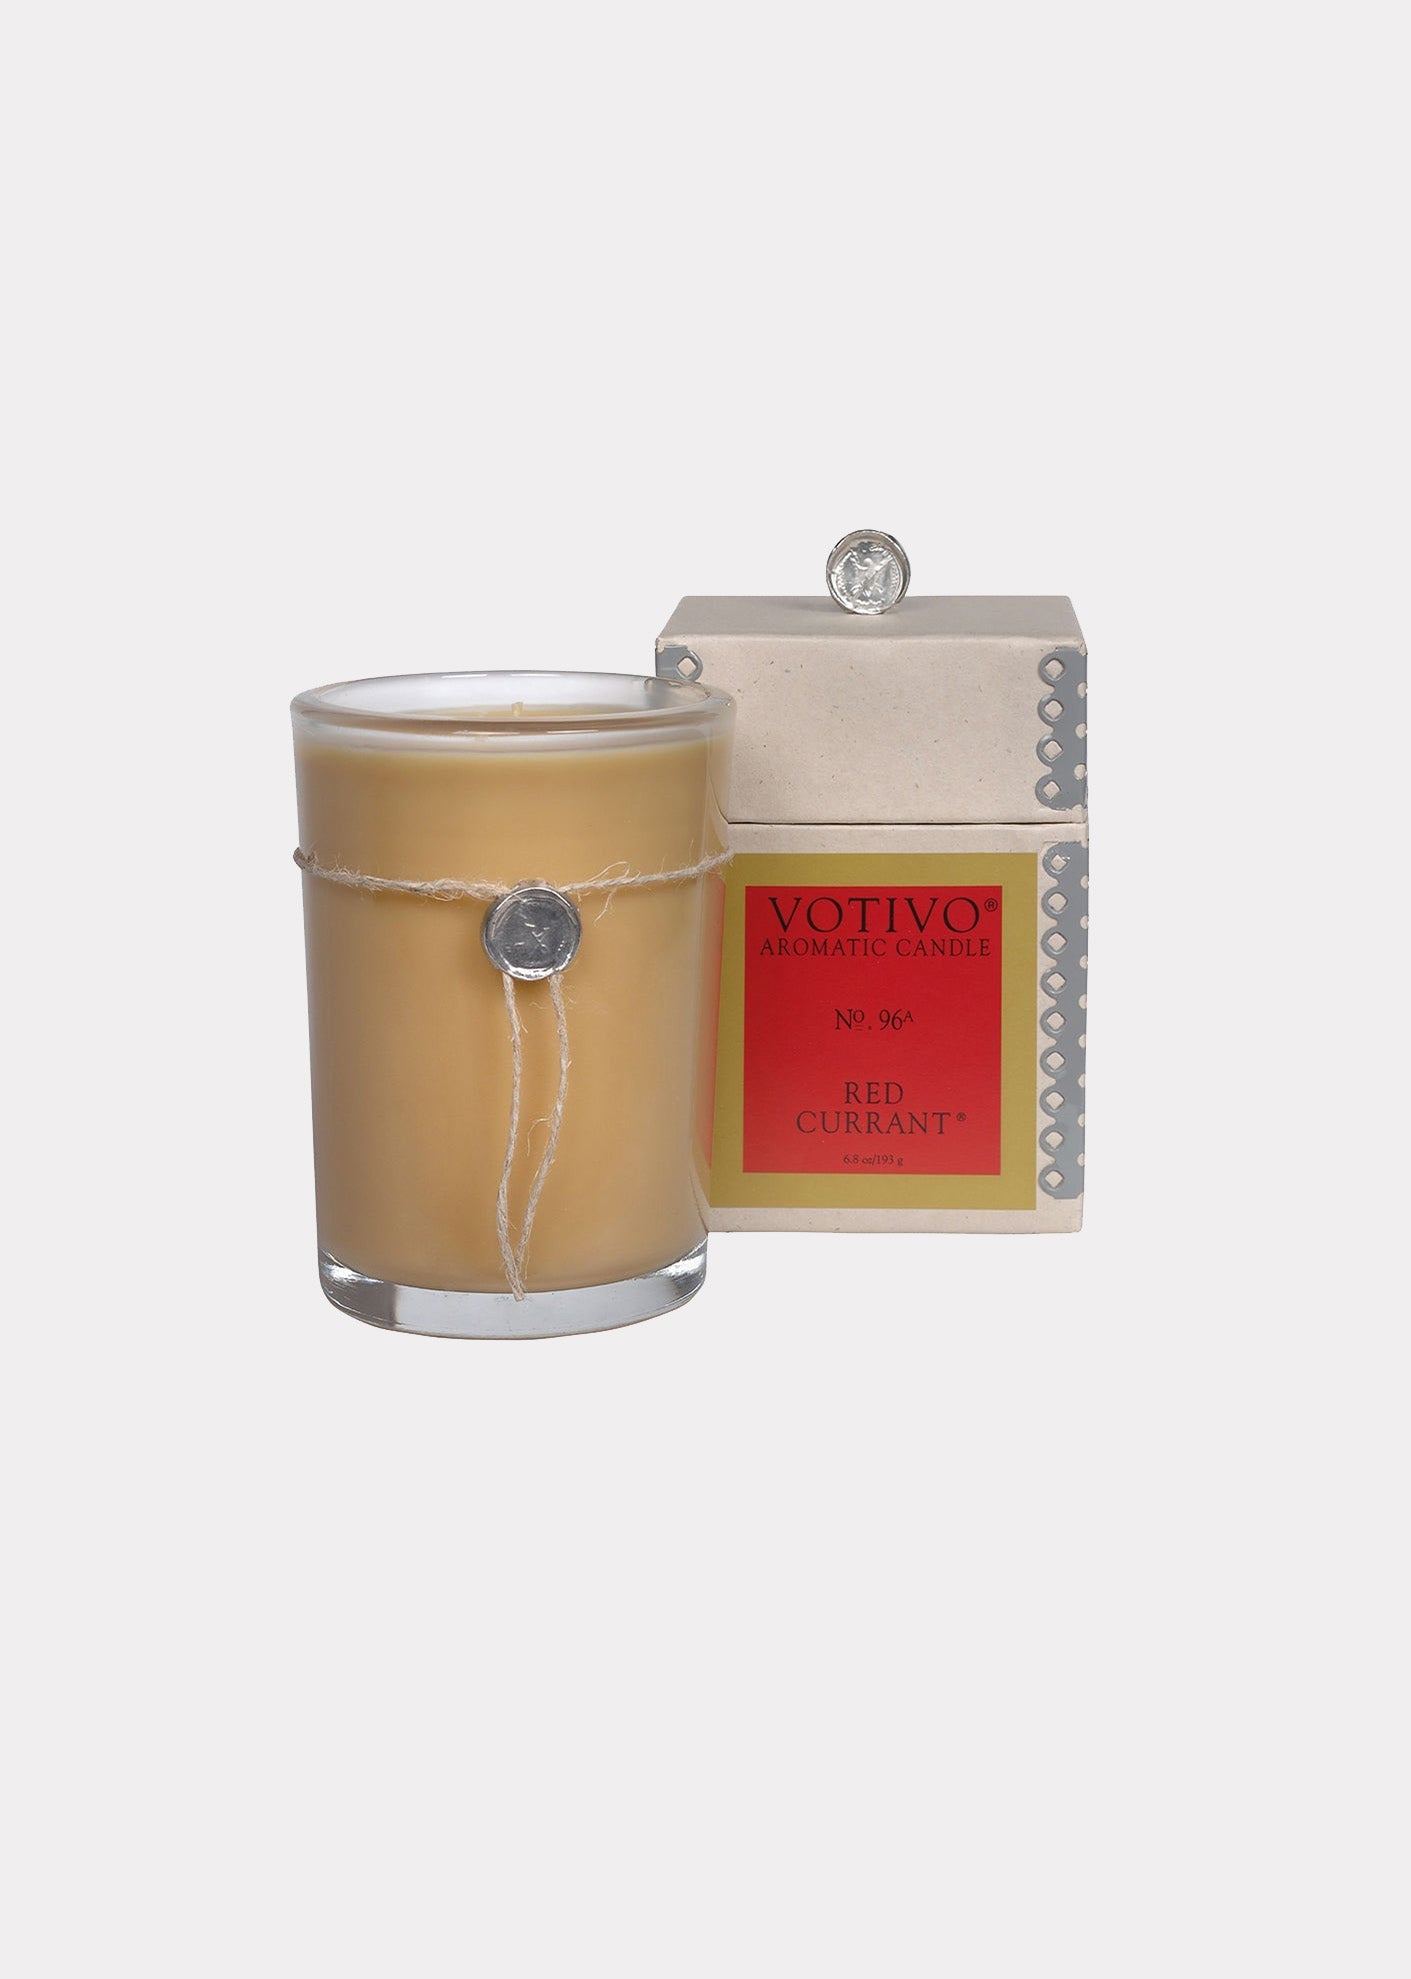 VOTIVO CANDLE IN GLASS - RED CURRANT